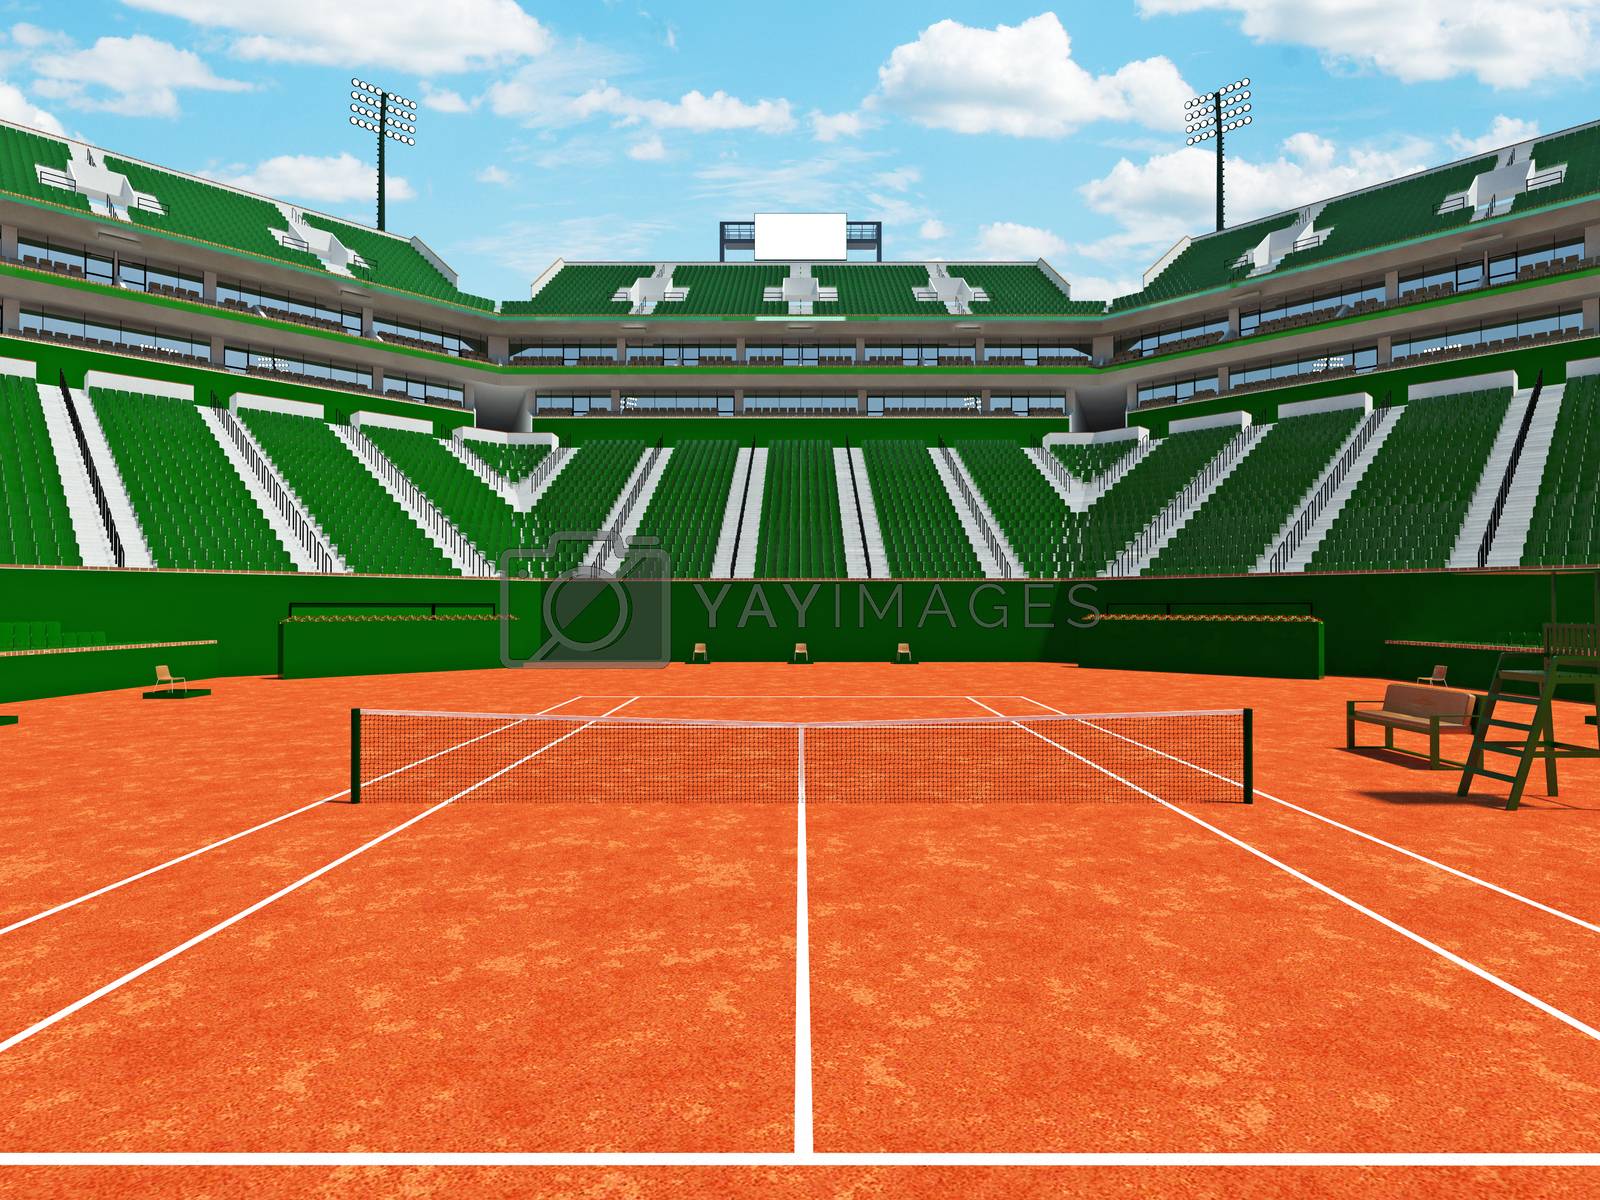 Royalty free image of Beautiful open tennis clay court stadium with green seats and VIP boxes for fifteen thousand fans by danilo_vuletic